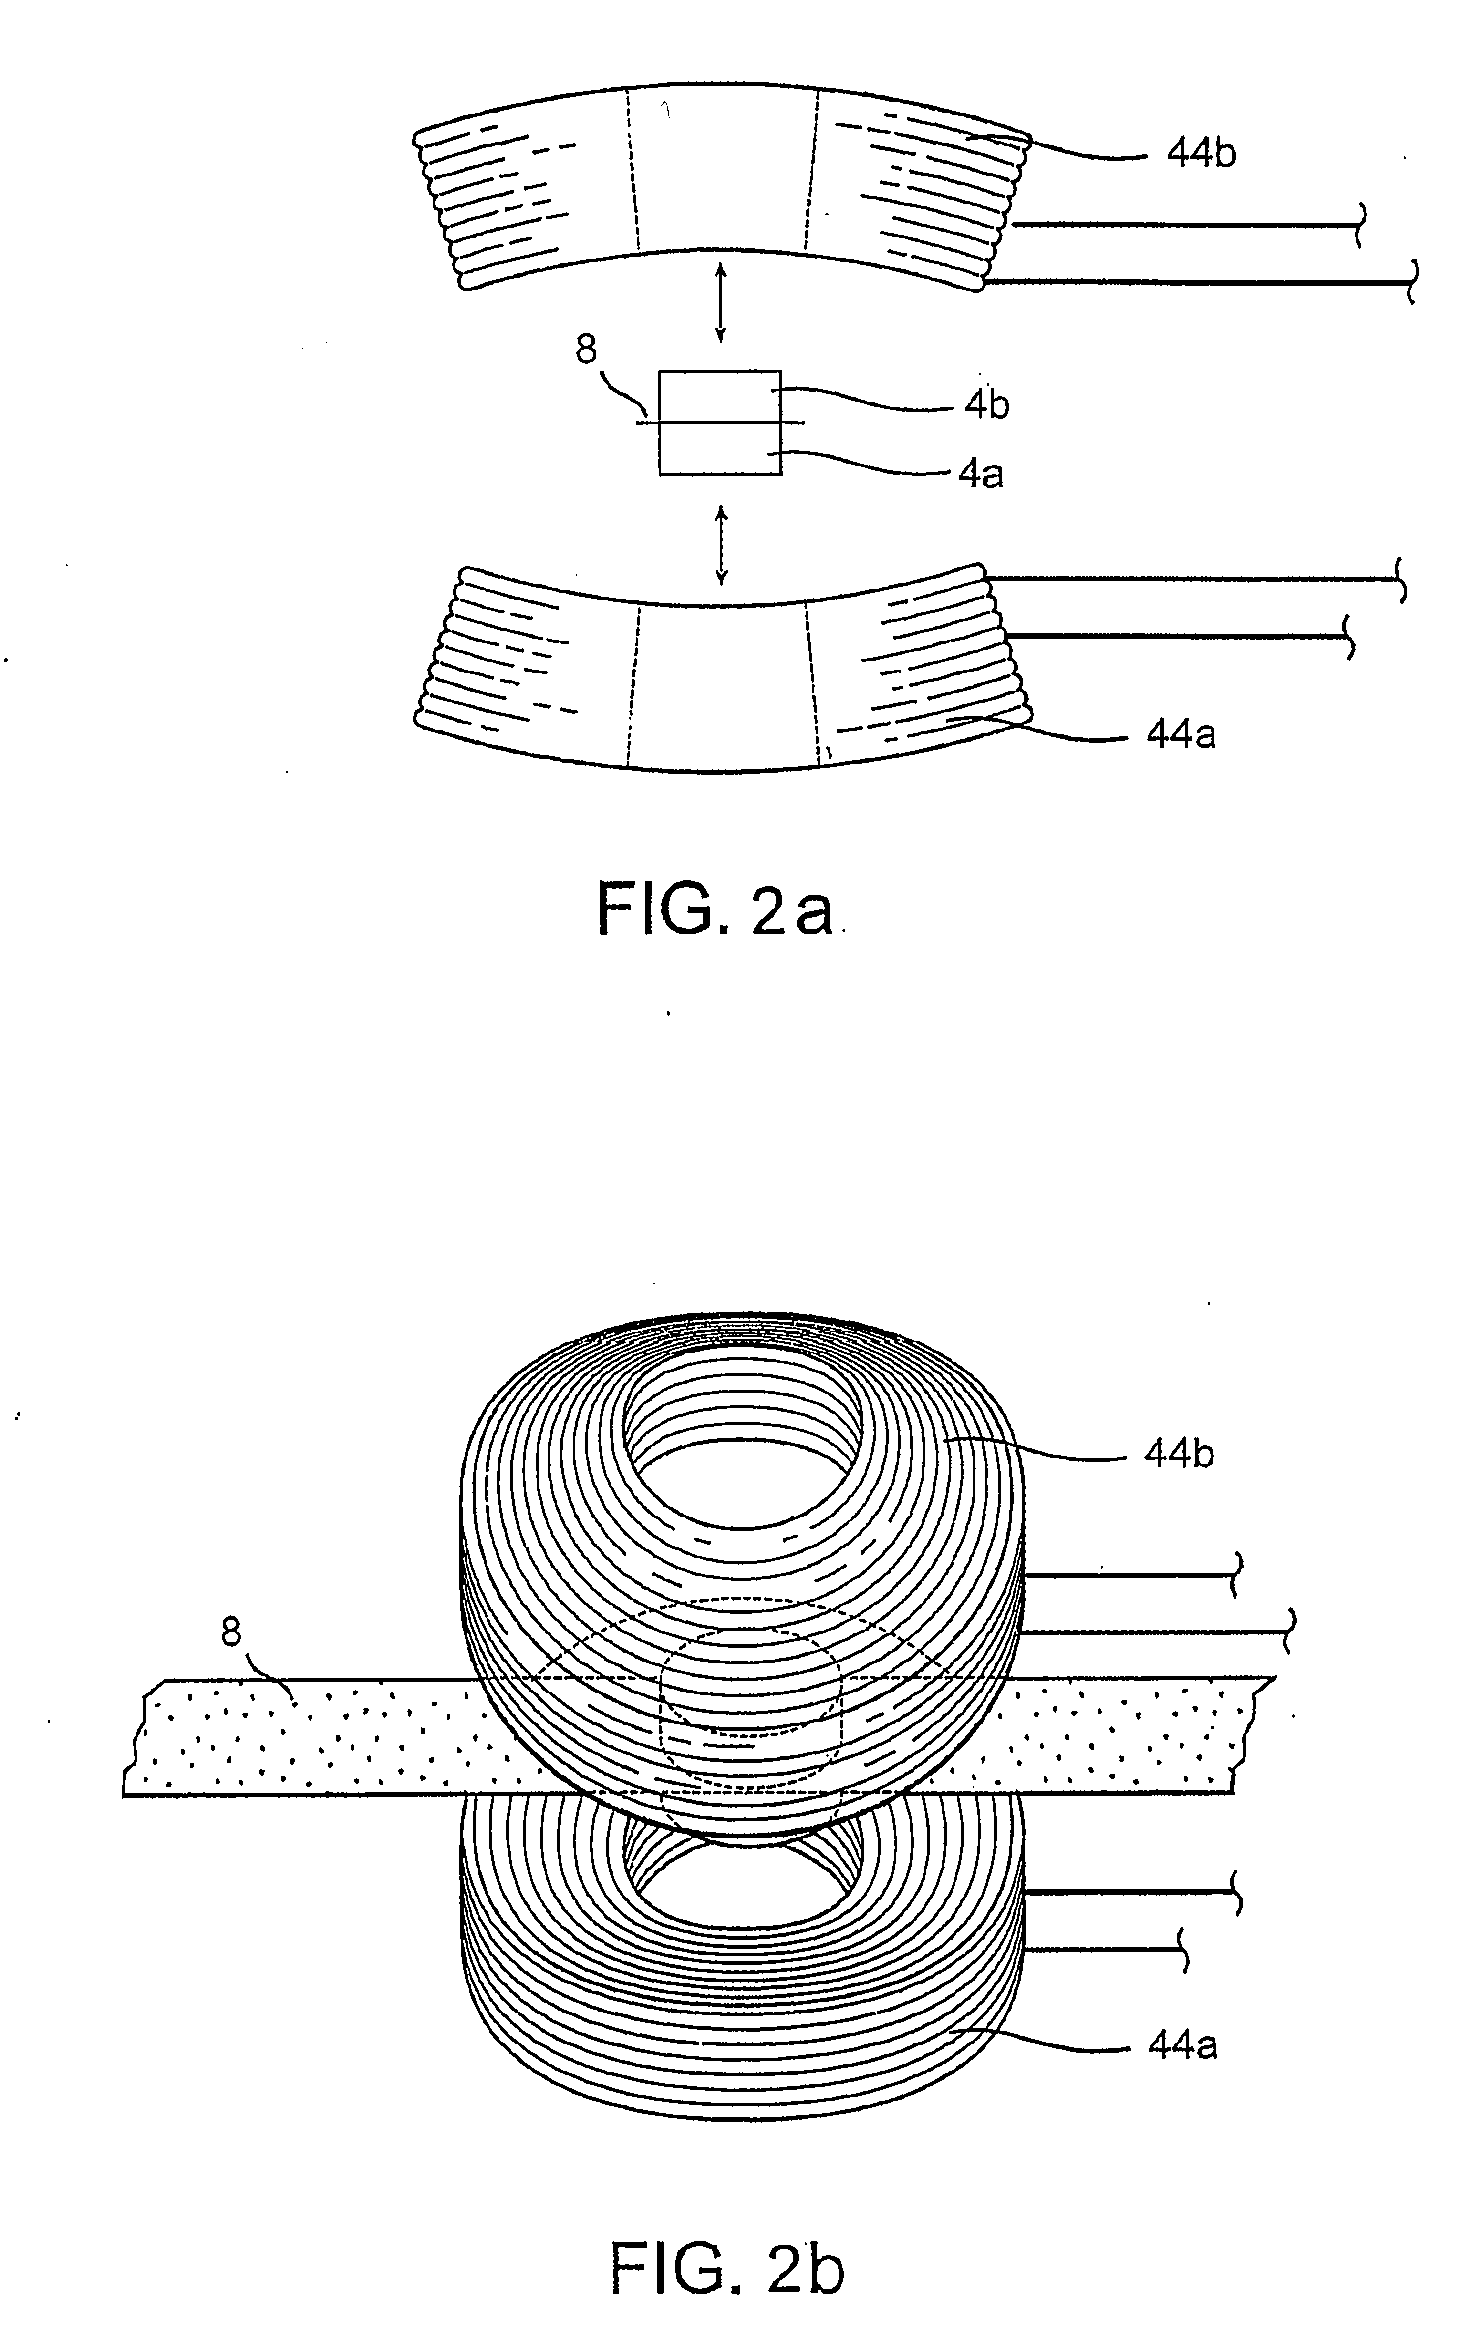 Fluid-induced energy converter with curved parts